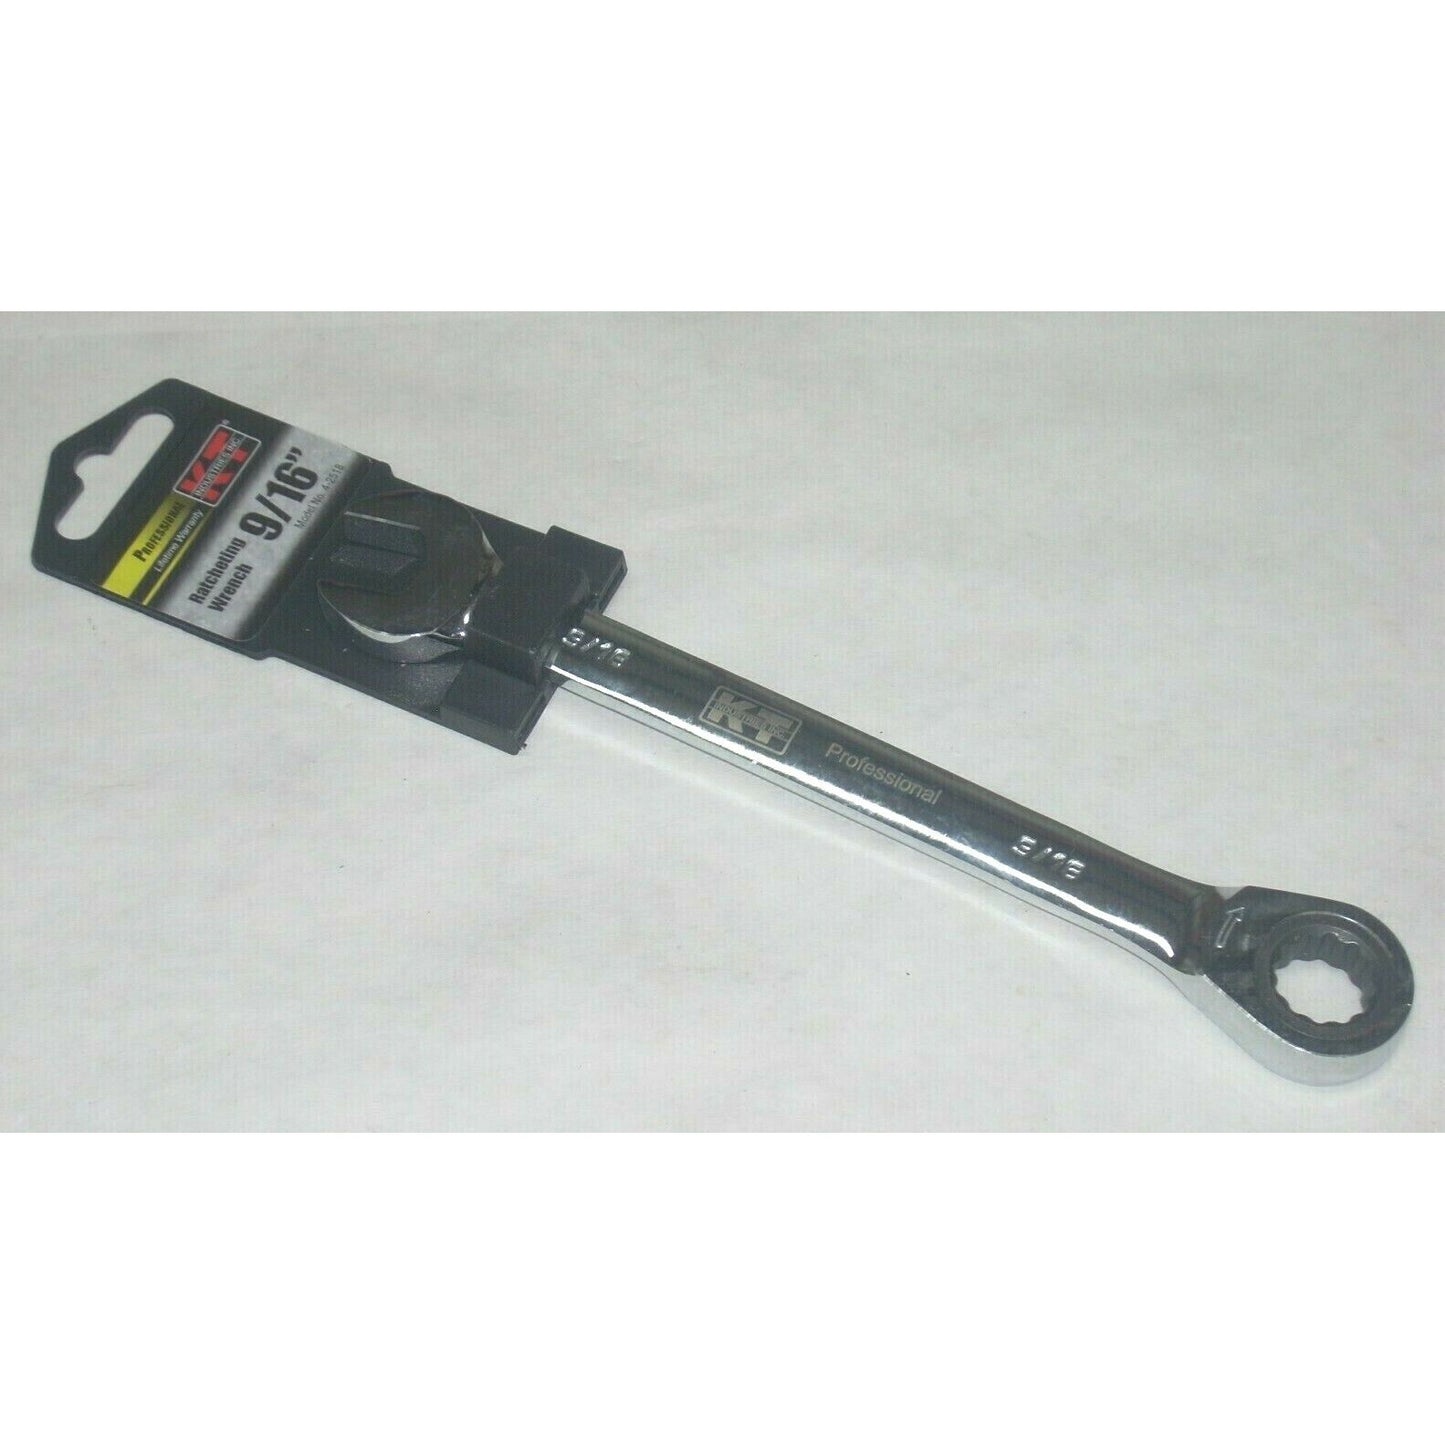 KT Industries 4-2518 Combination Ratcheting Wrench 9/16"